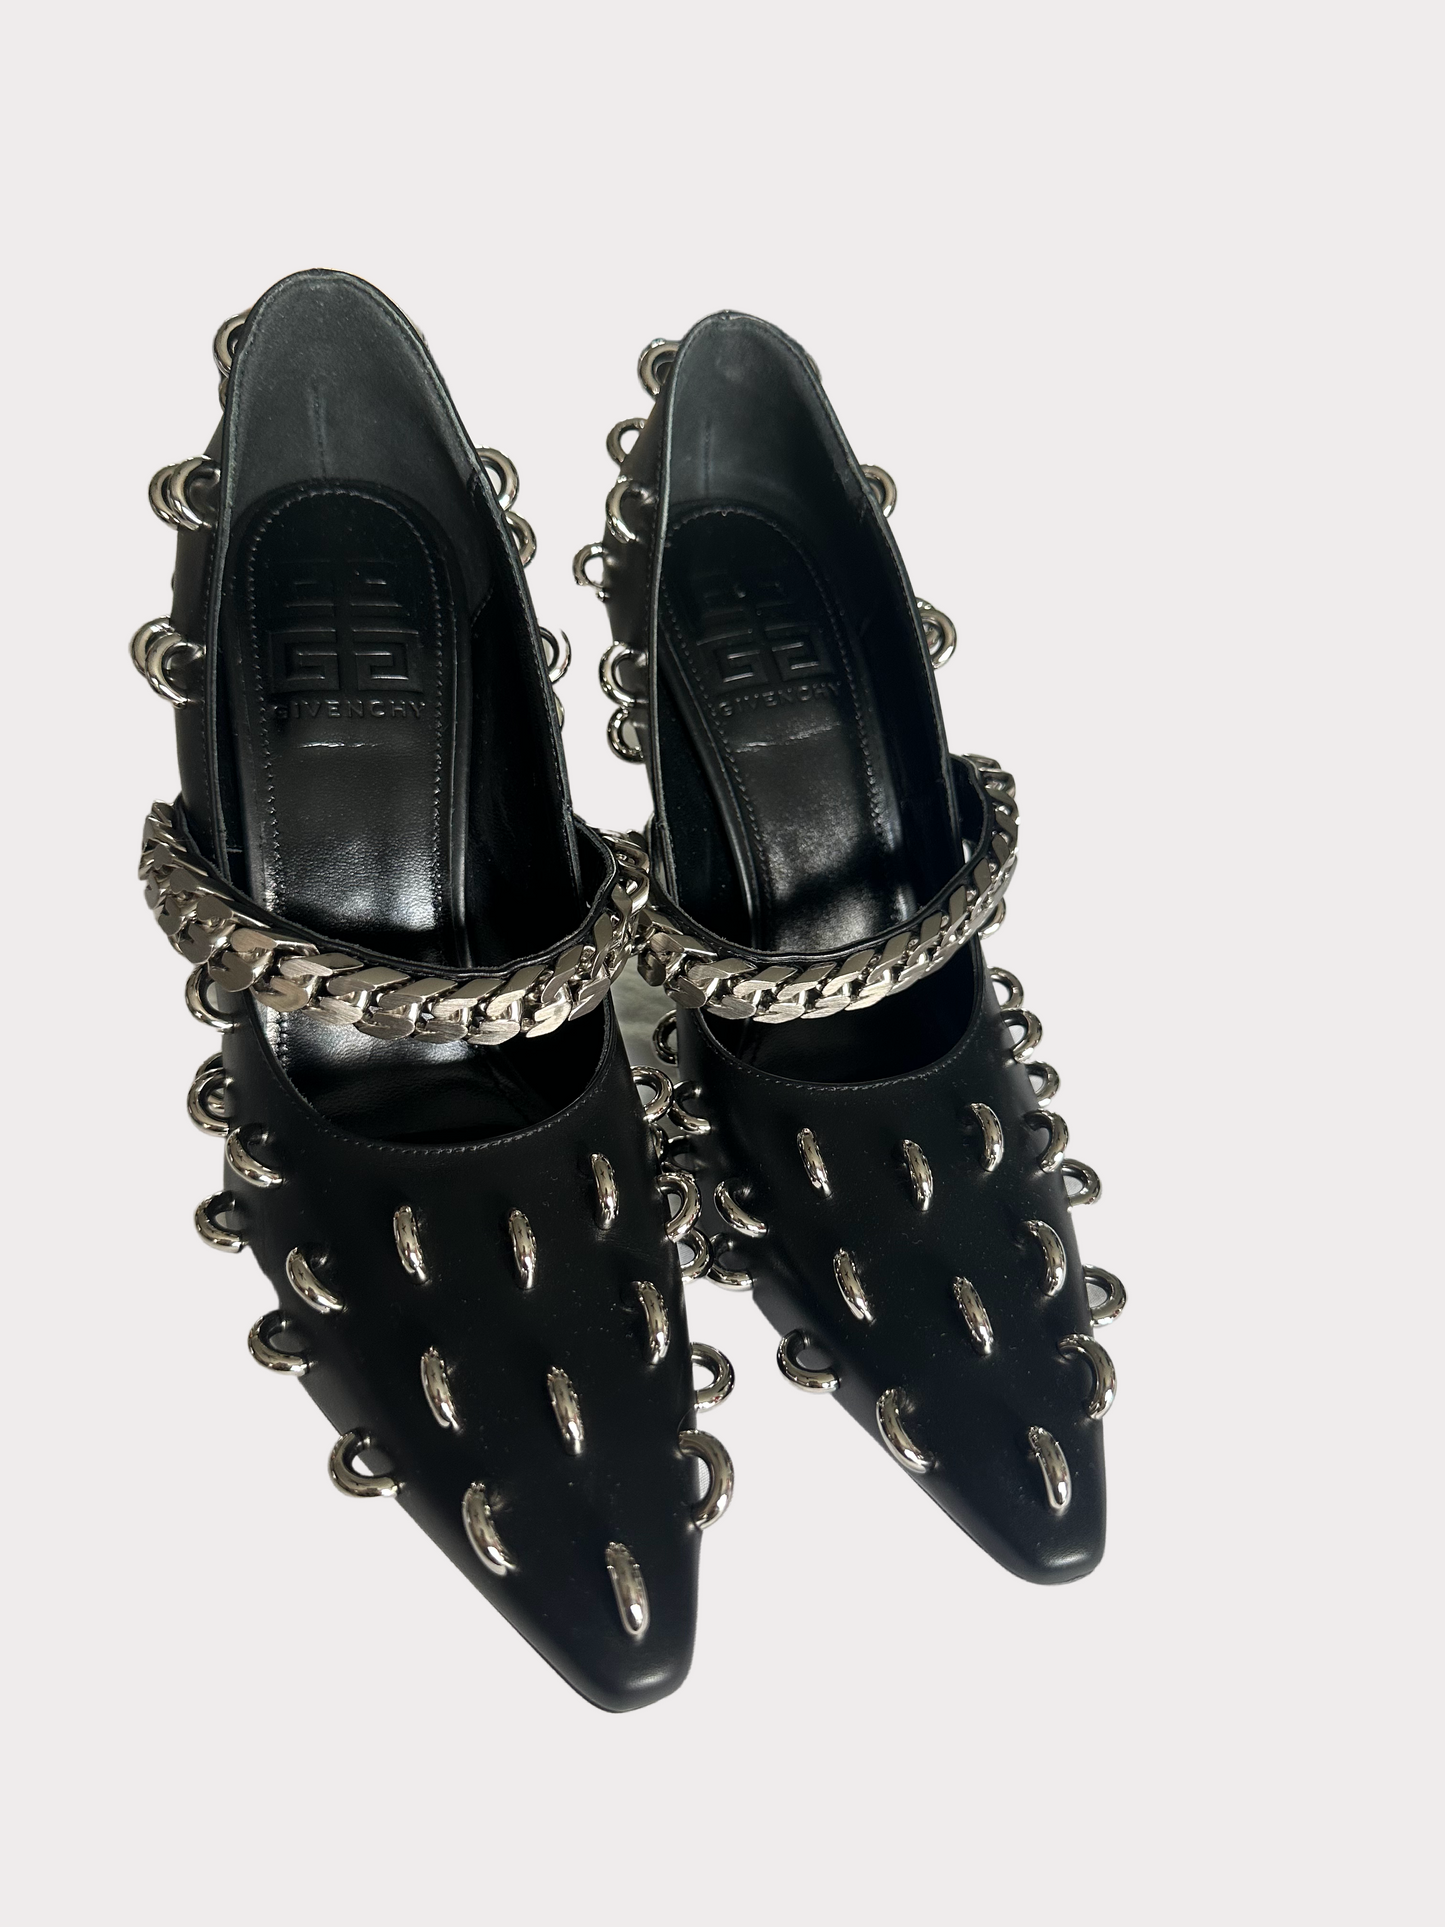 Givenchy - Black Studded + Chain Pointed Toe Heel - Never Worn